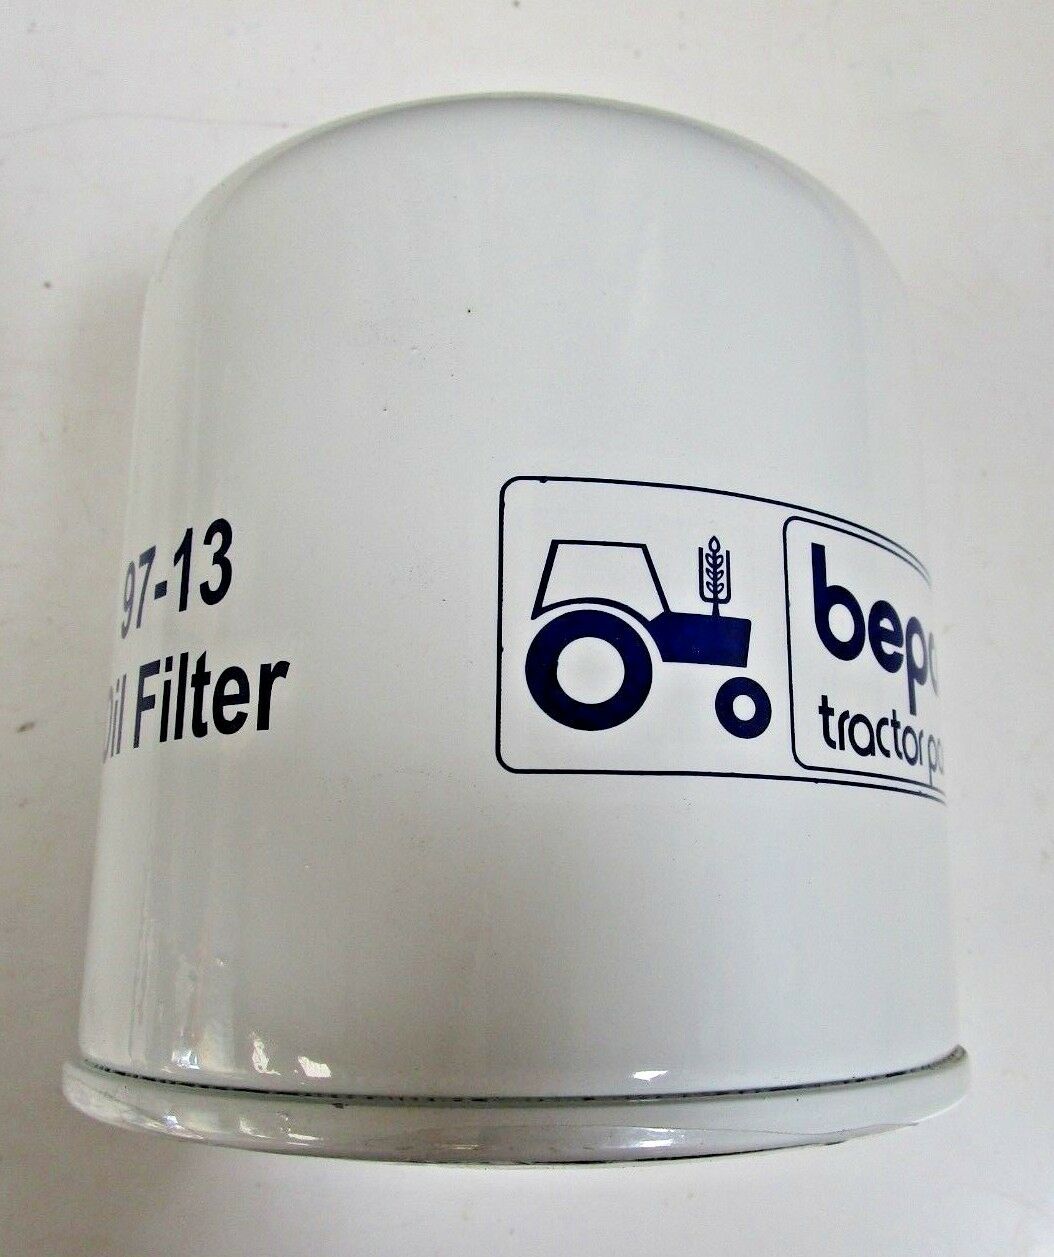 Engine oil filter for Ford 7810 7910 8210 8530 8630 8730 TW15 TW20 TW25  tractors